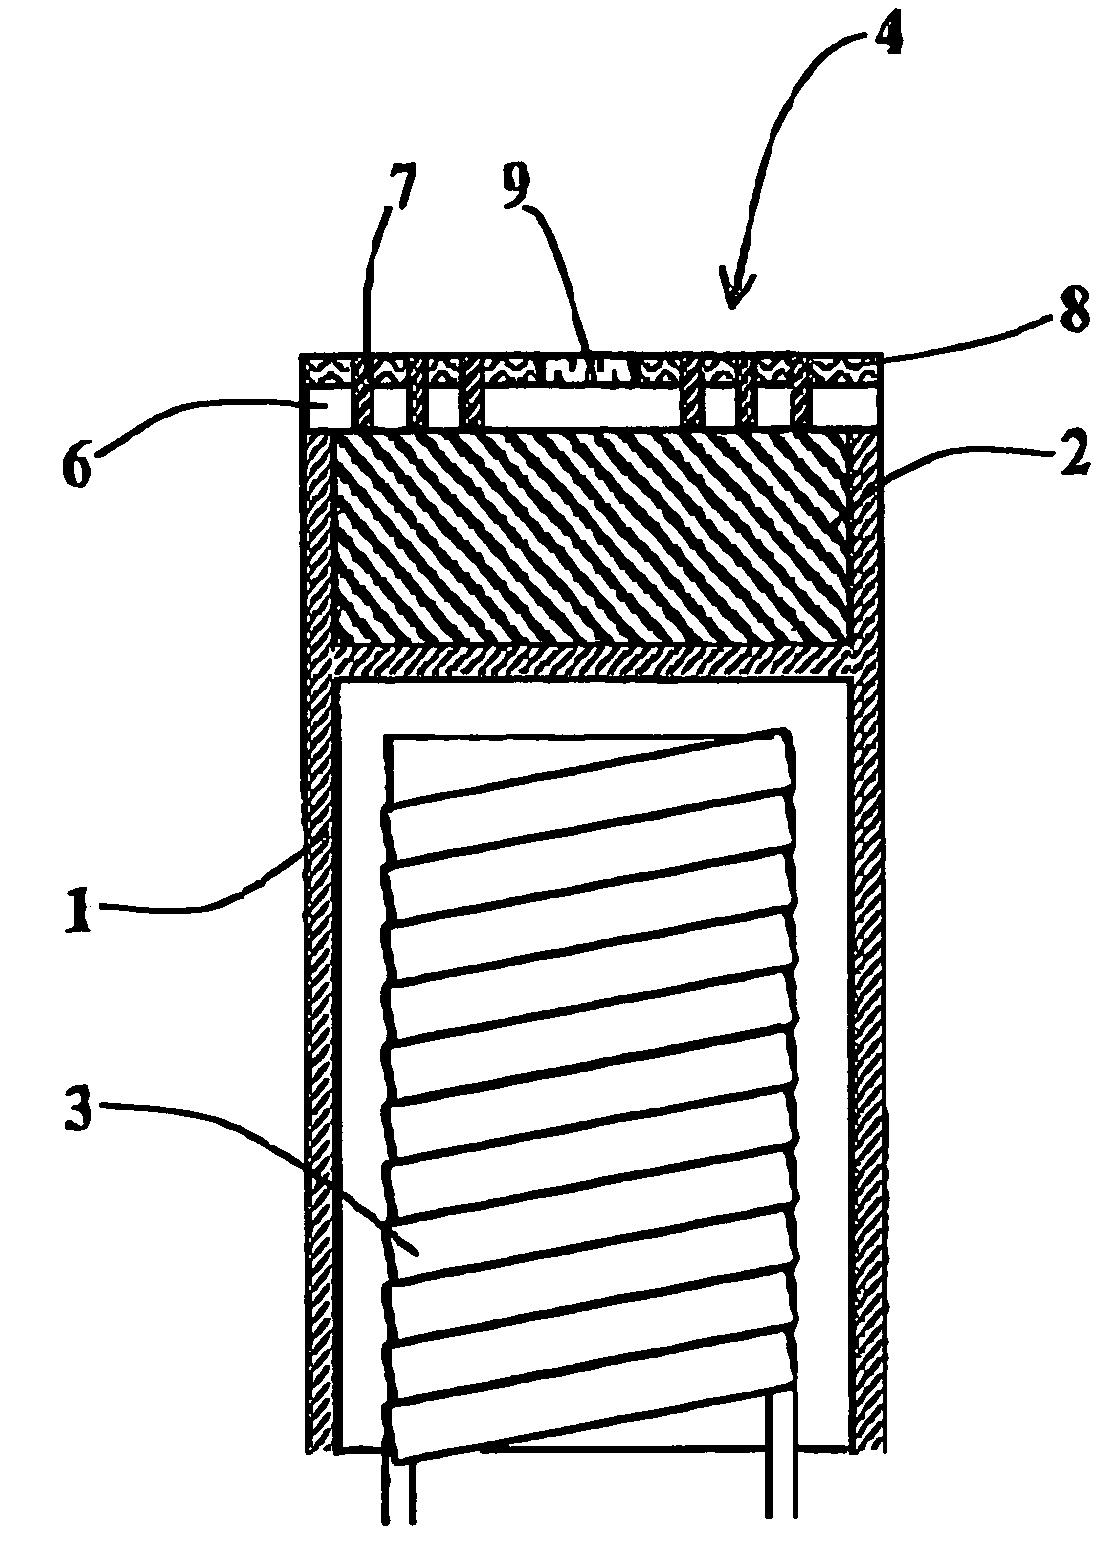 System, method and apparatus for multi-beam lithography including a dispenser cathode for homogeneous electron emission